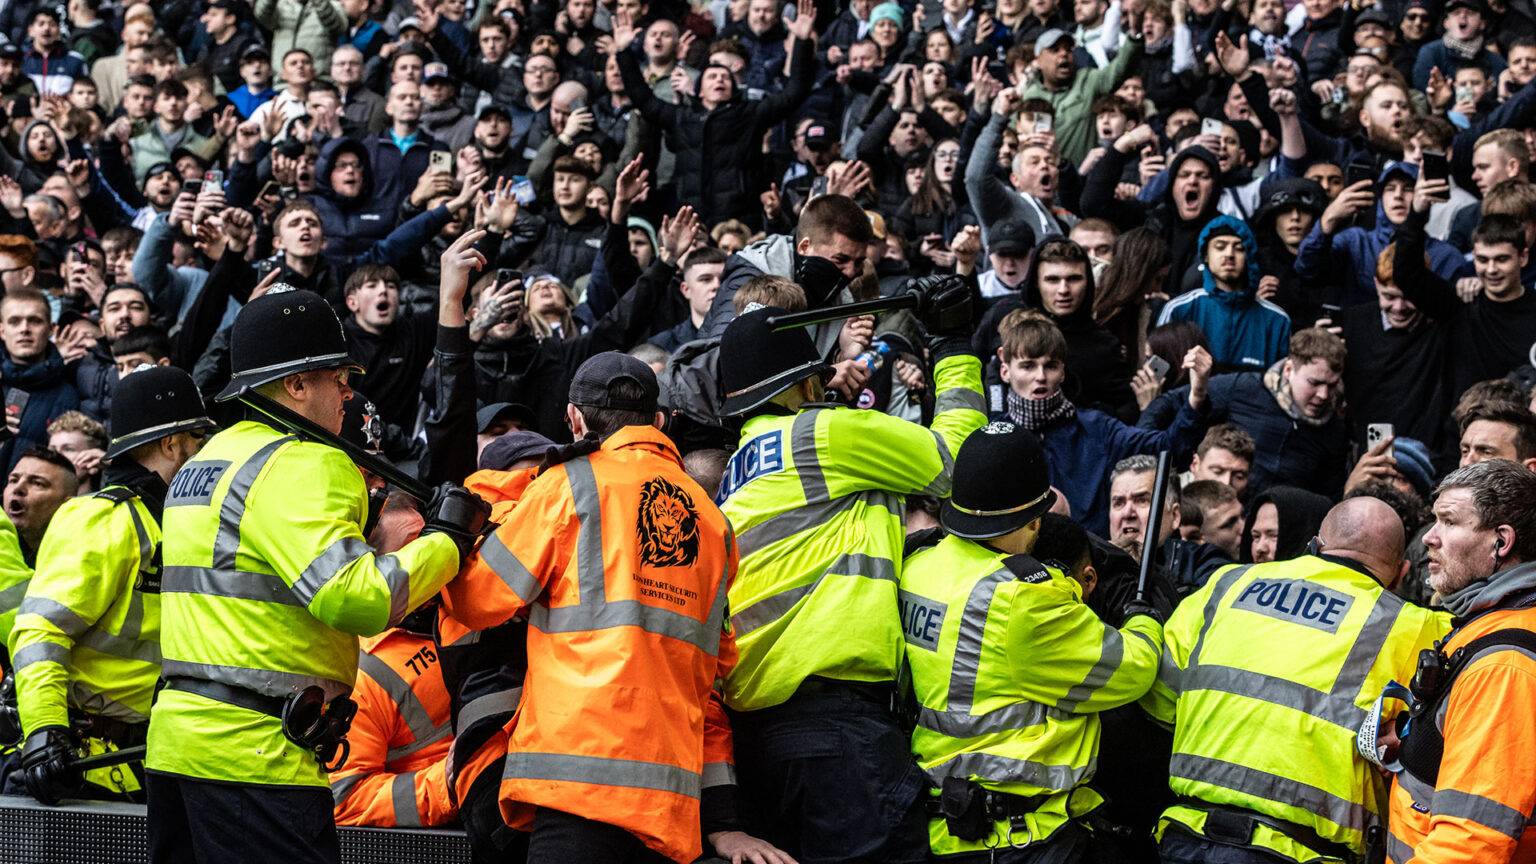 FA investigates crowd trouble during Wolves’ victory at West Brom